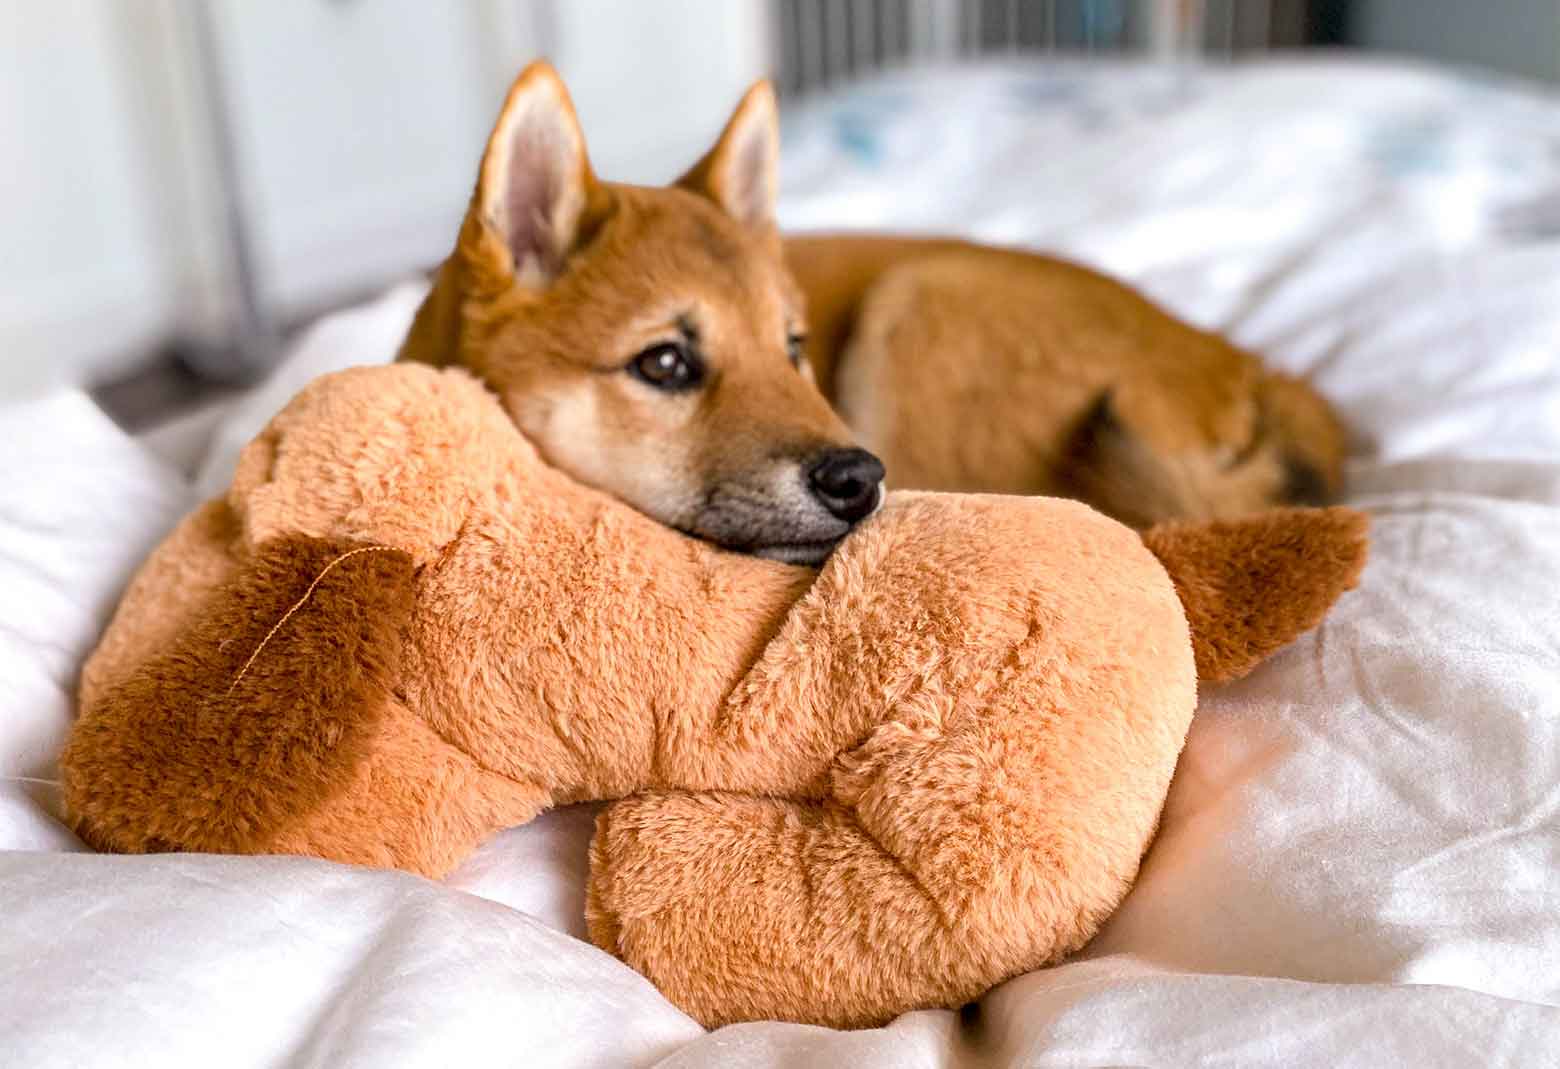 Dog On Bed Curled Up With Snuggle Puppy